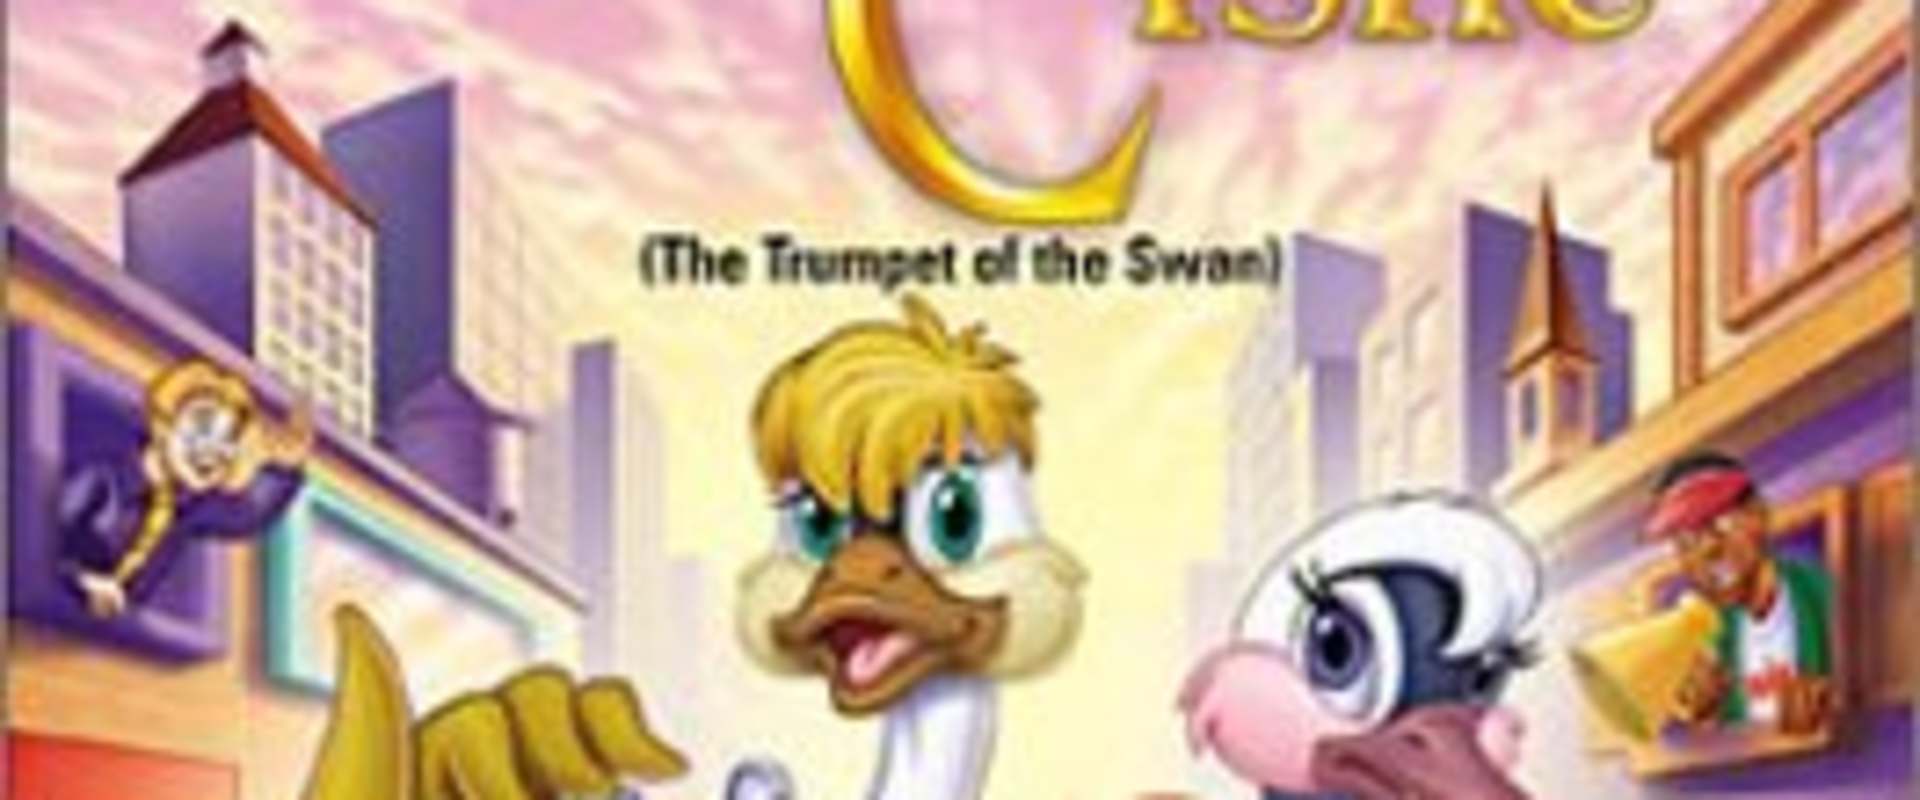 The Trumpet of the Swan background 2